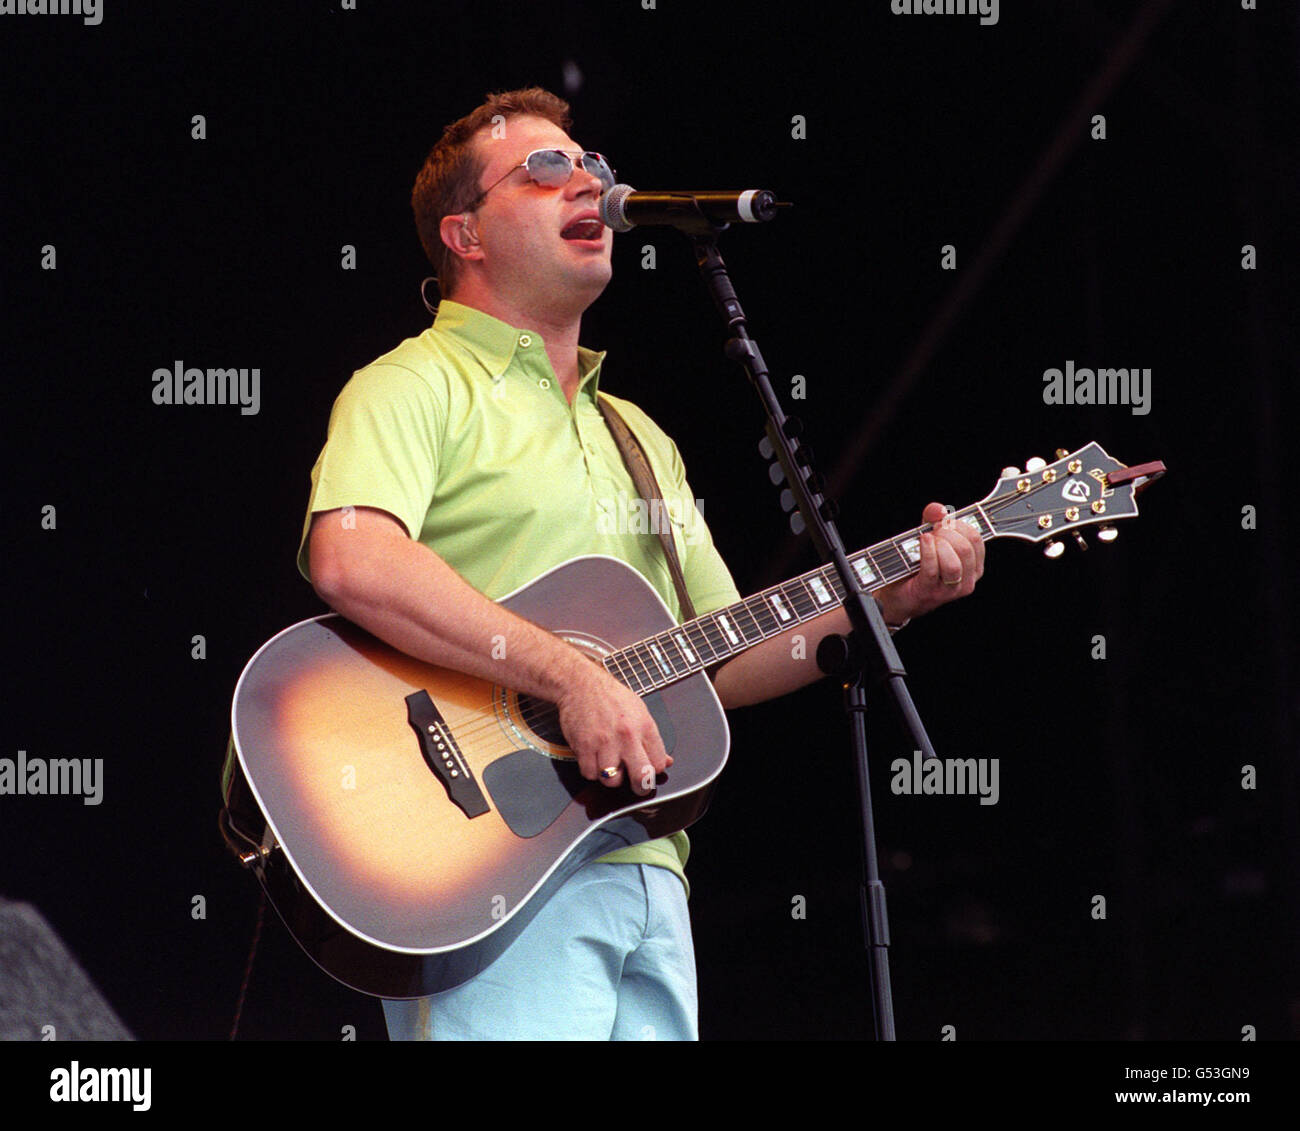 Steve Page Of The Canadian Band Barenaked Ladies Performing On Stage At The V2000 Music Festival